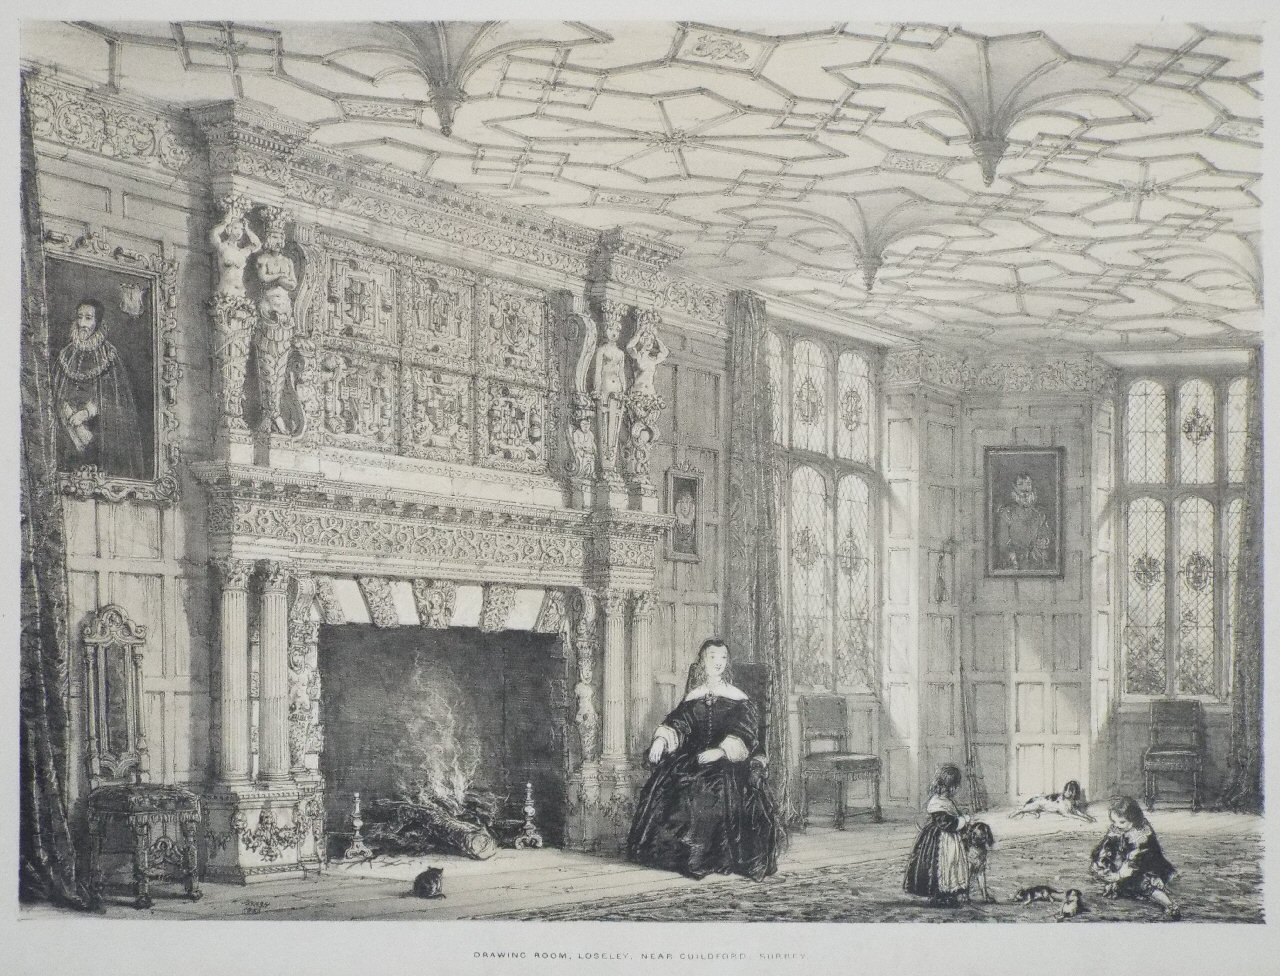 Lithograph - Drawing Room, Loseley, near Guildford, Surrey - Nash